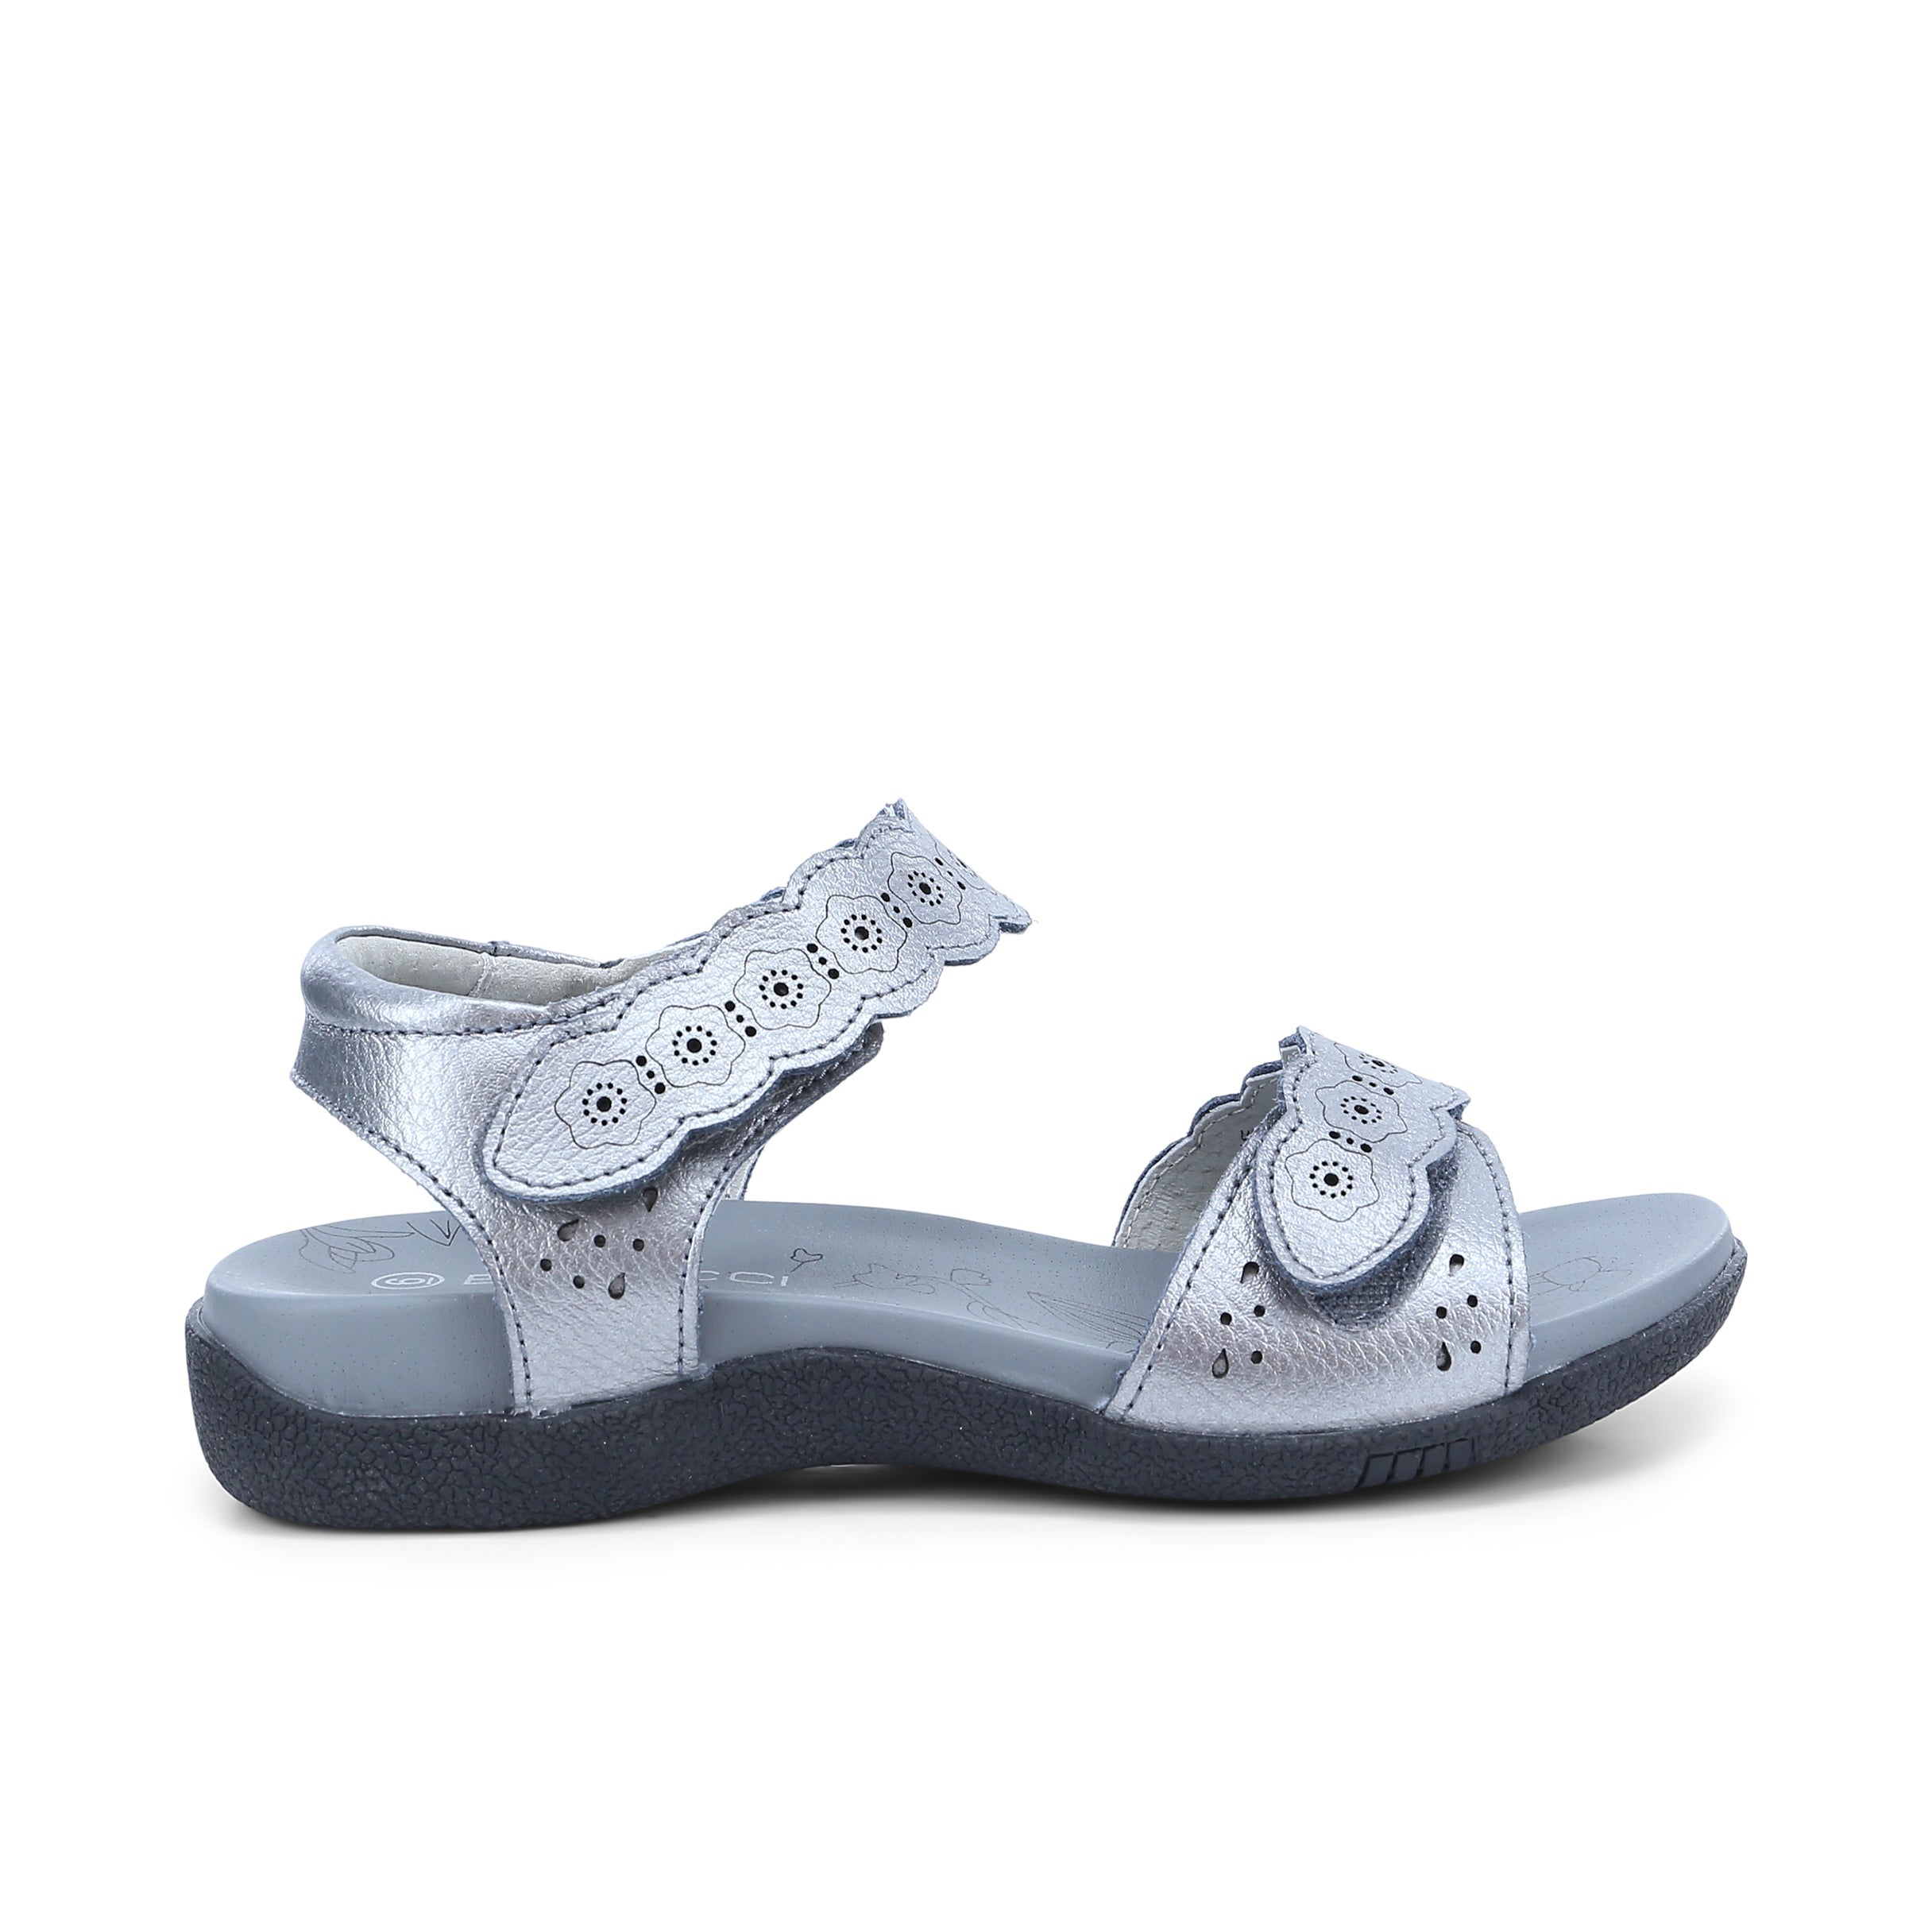 Bennicci Abbey Leather Sandals in Pewter